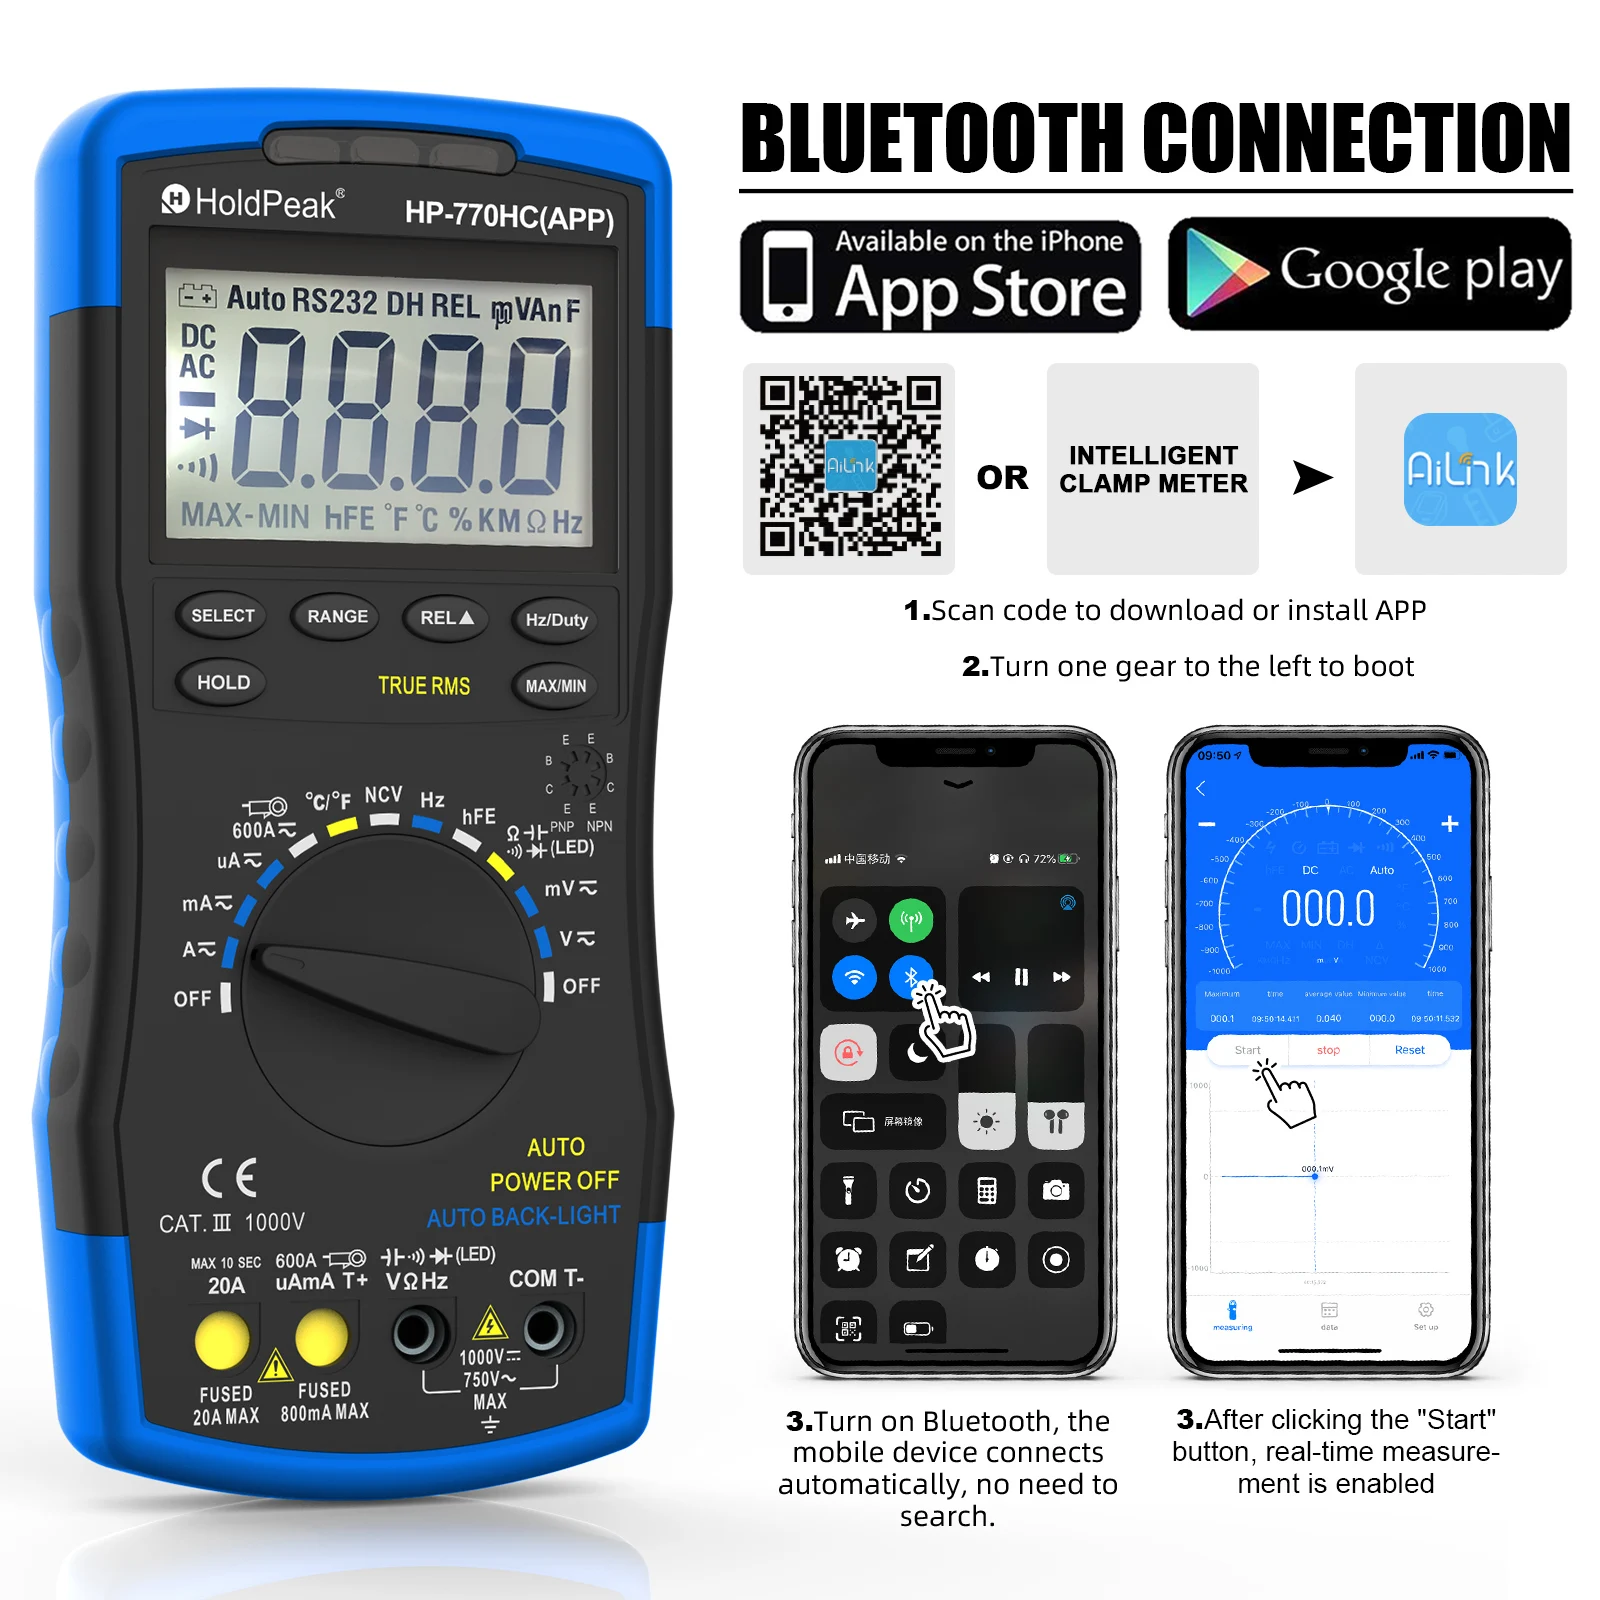 HoldPeak HP-770HC-APP True RMS Auto Ranging Digital Multimeter with NCV Feature and Temperature/Duty Cycle Test with Bluetooth